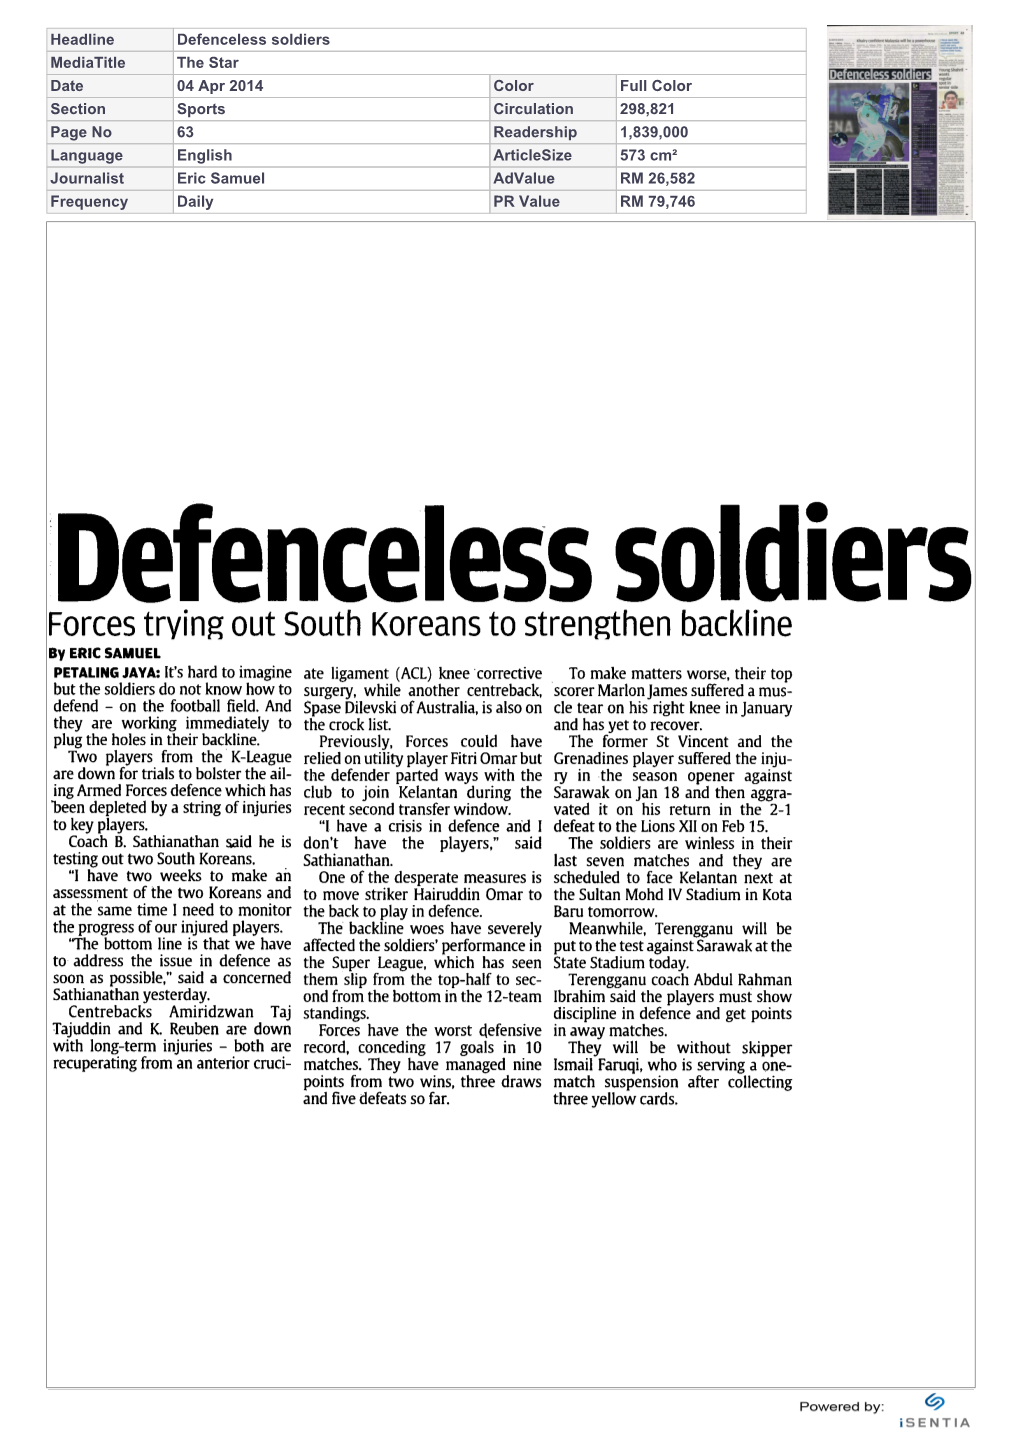 Defenceless Soldiers